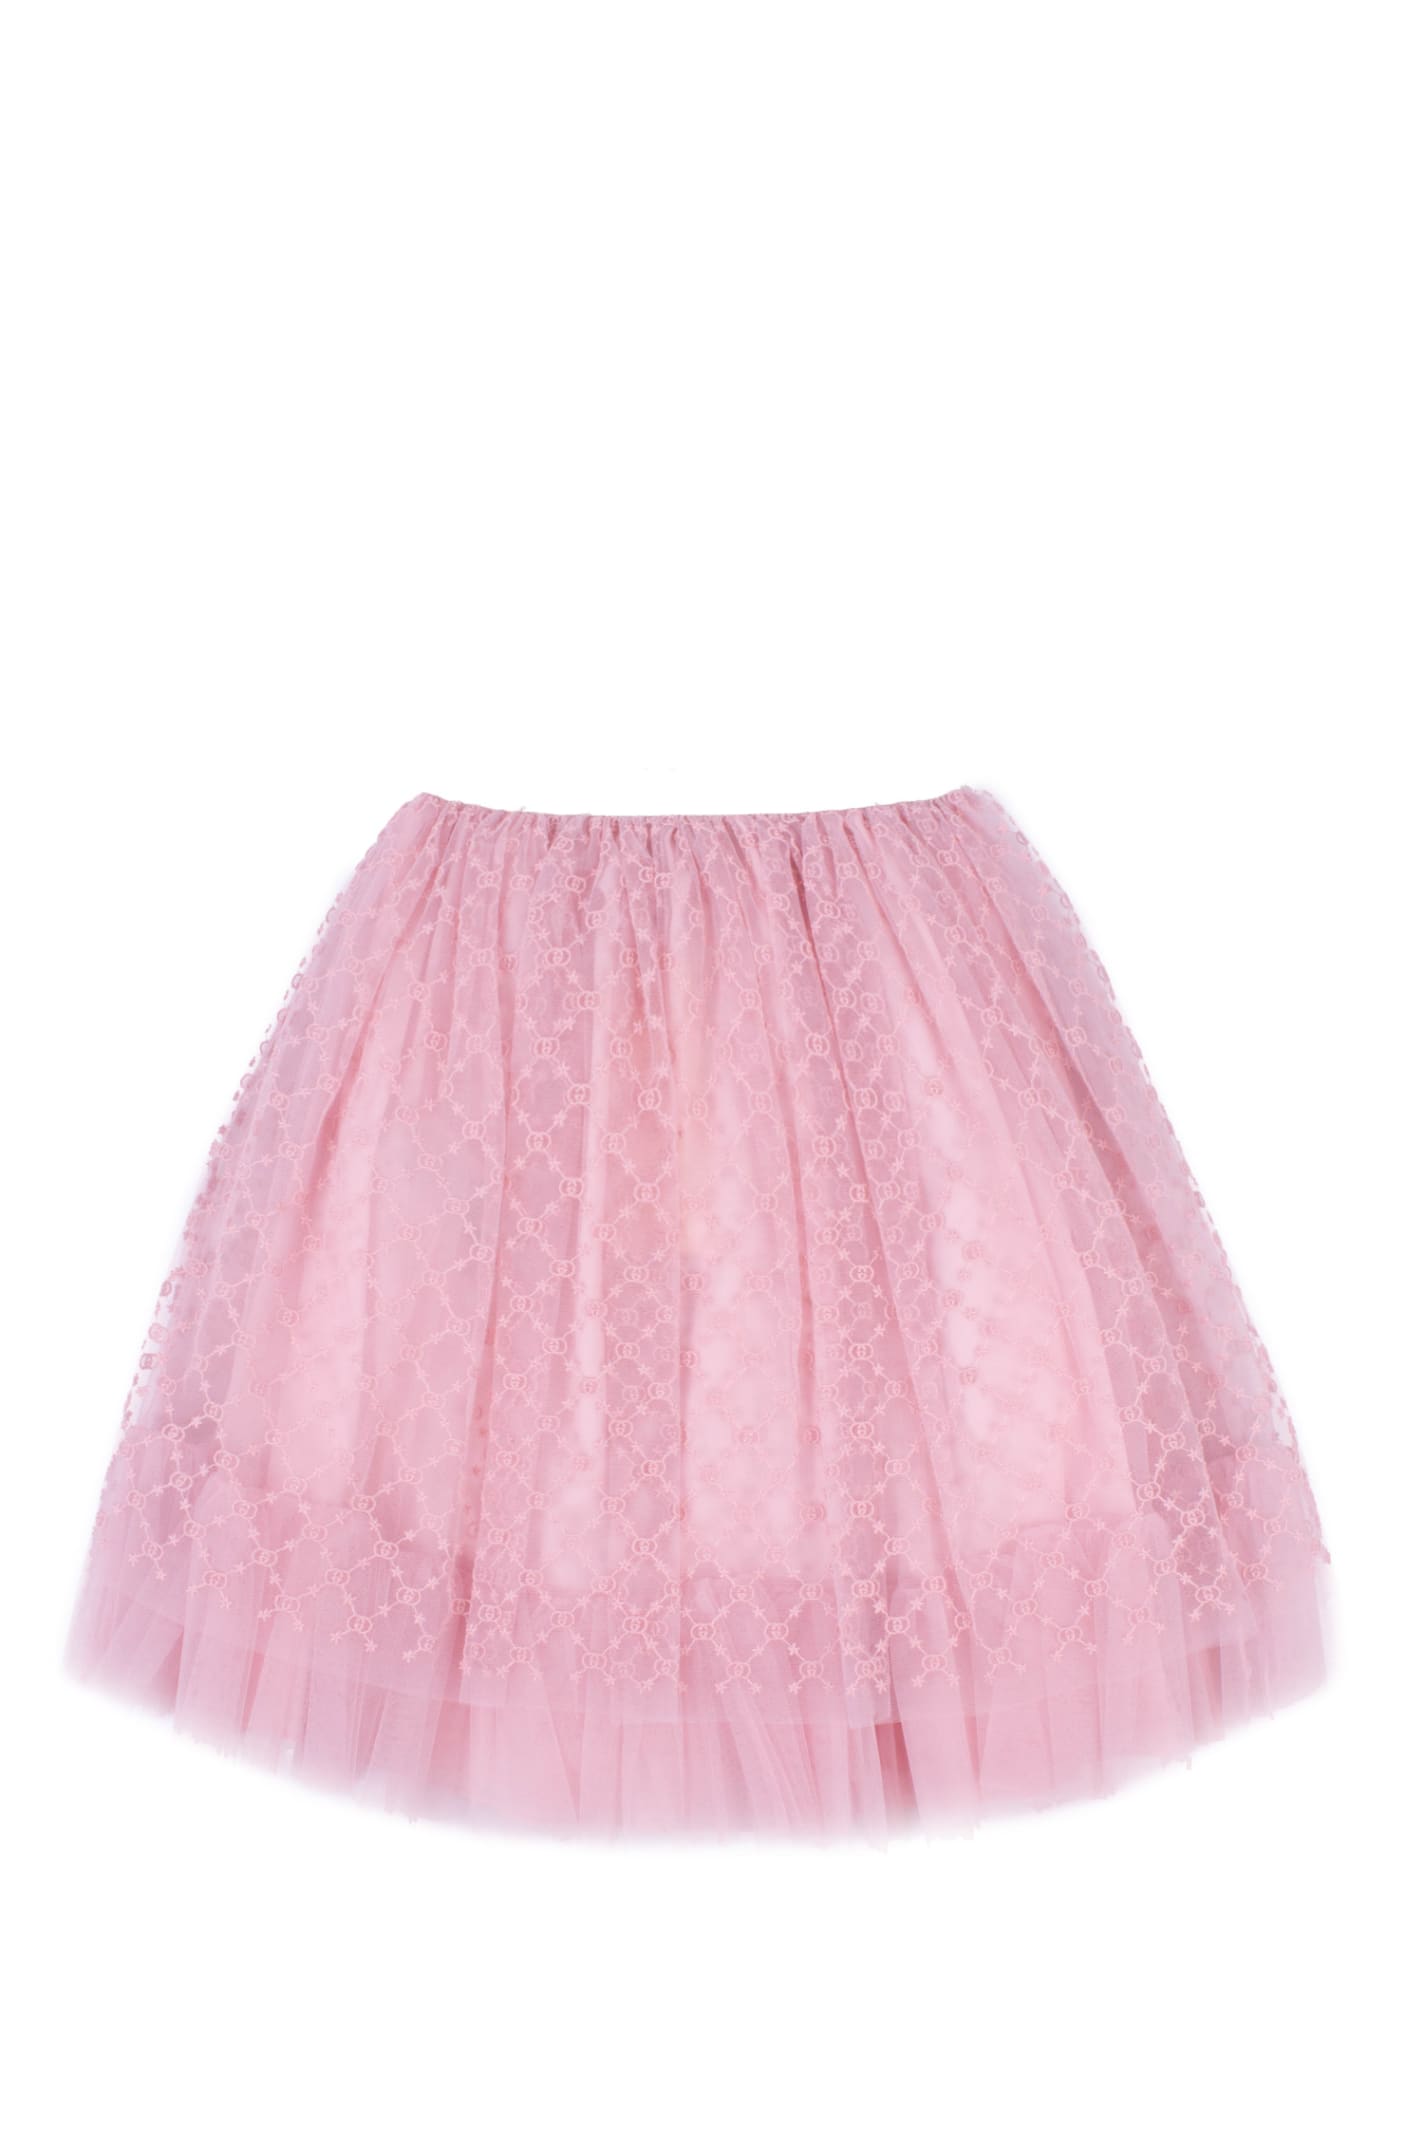 Gucci Tulle Skirt With Gg Stars